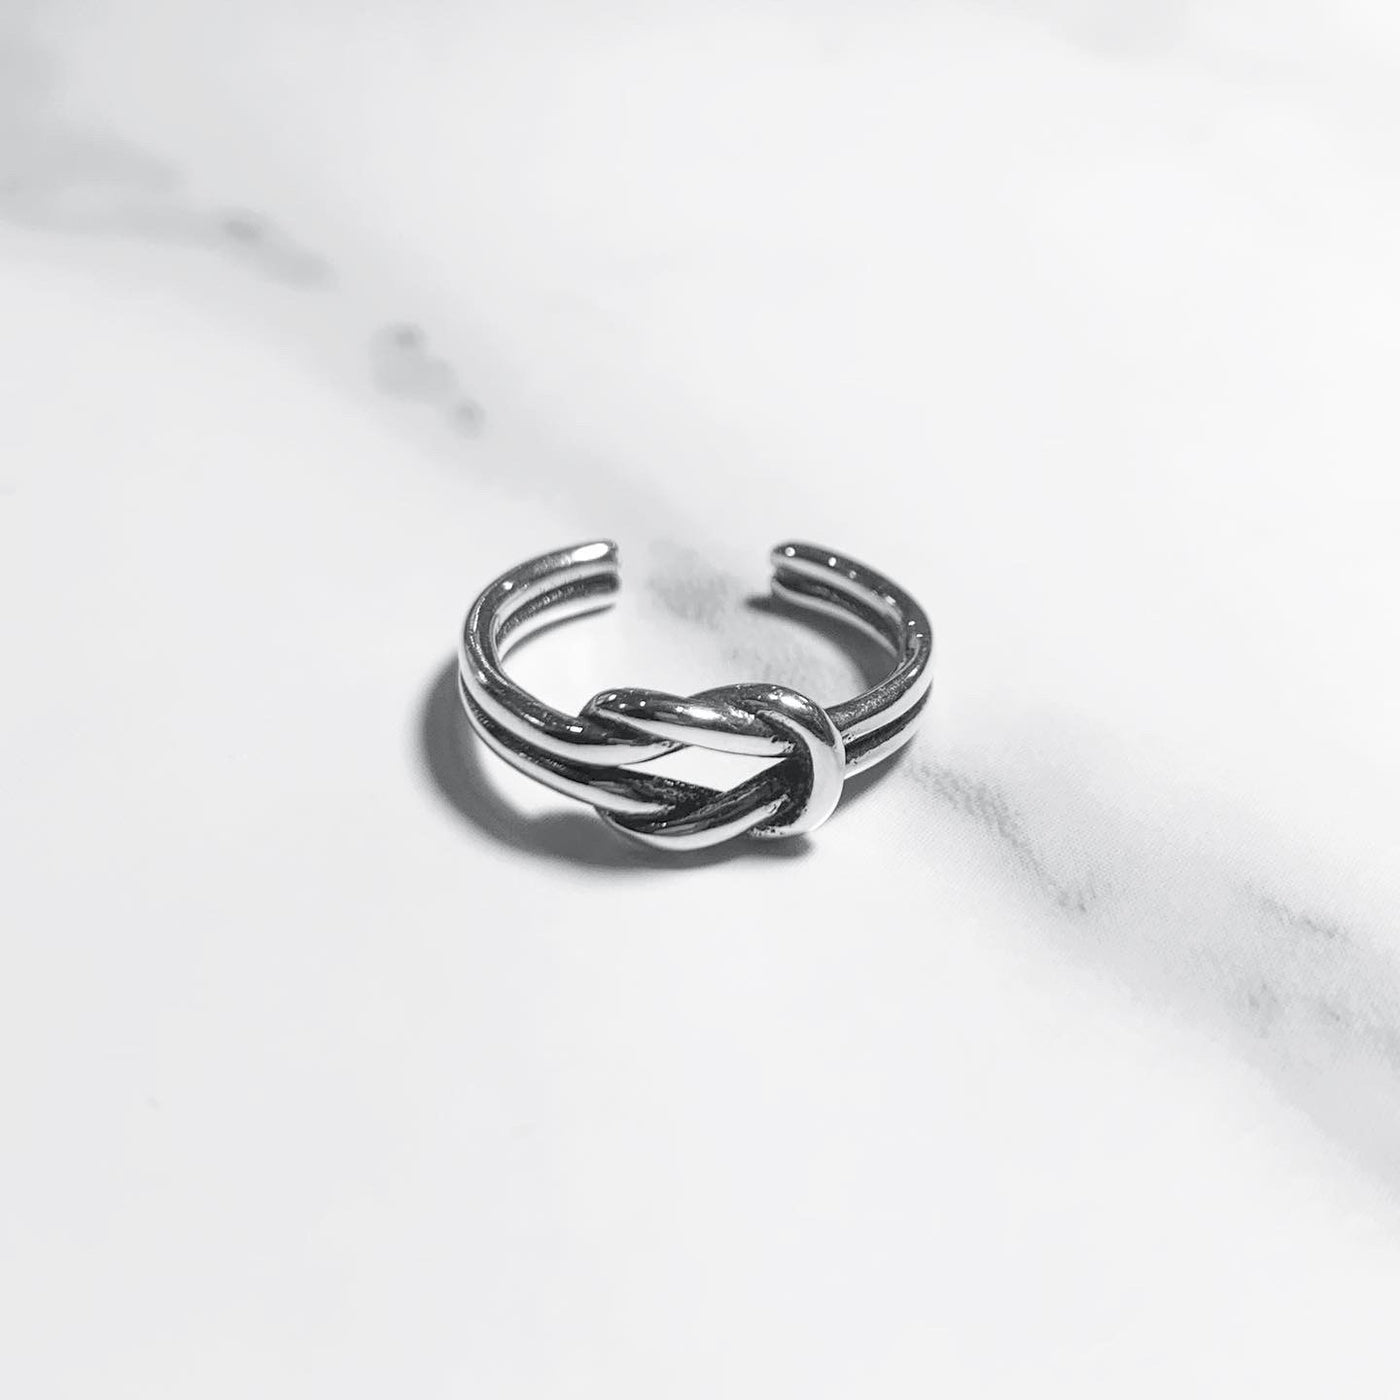 “Double knot” silver 925 ring